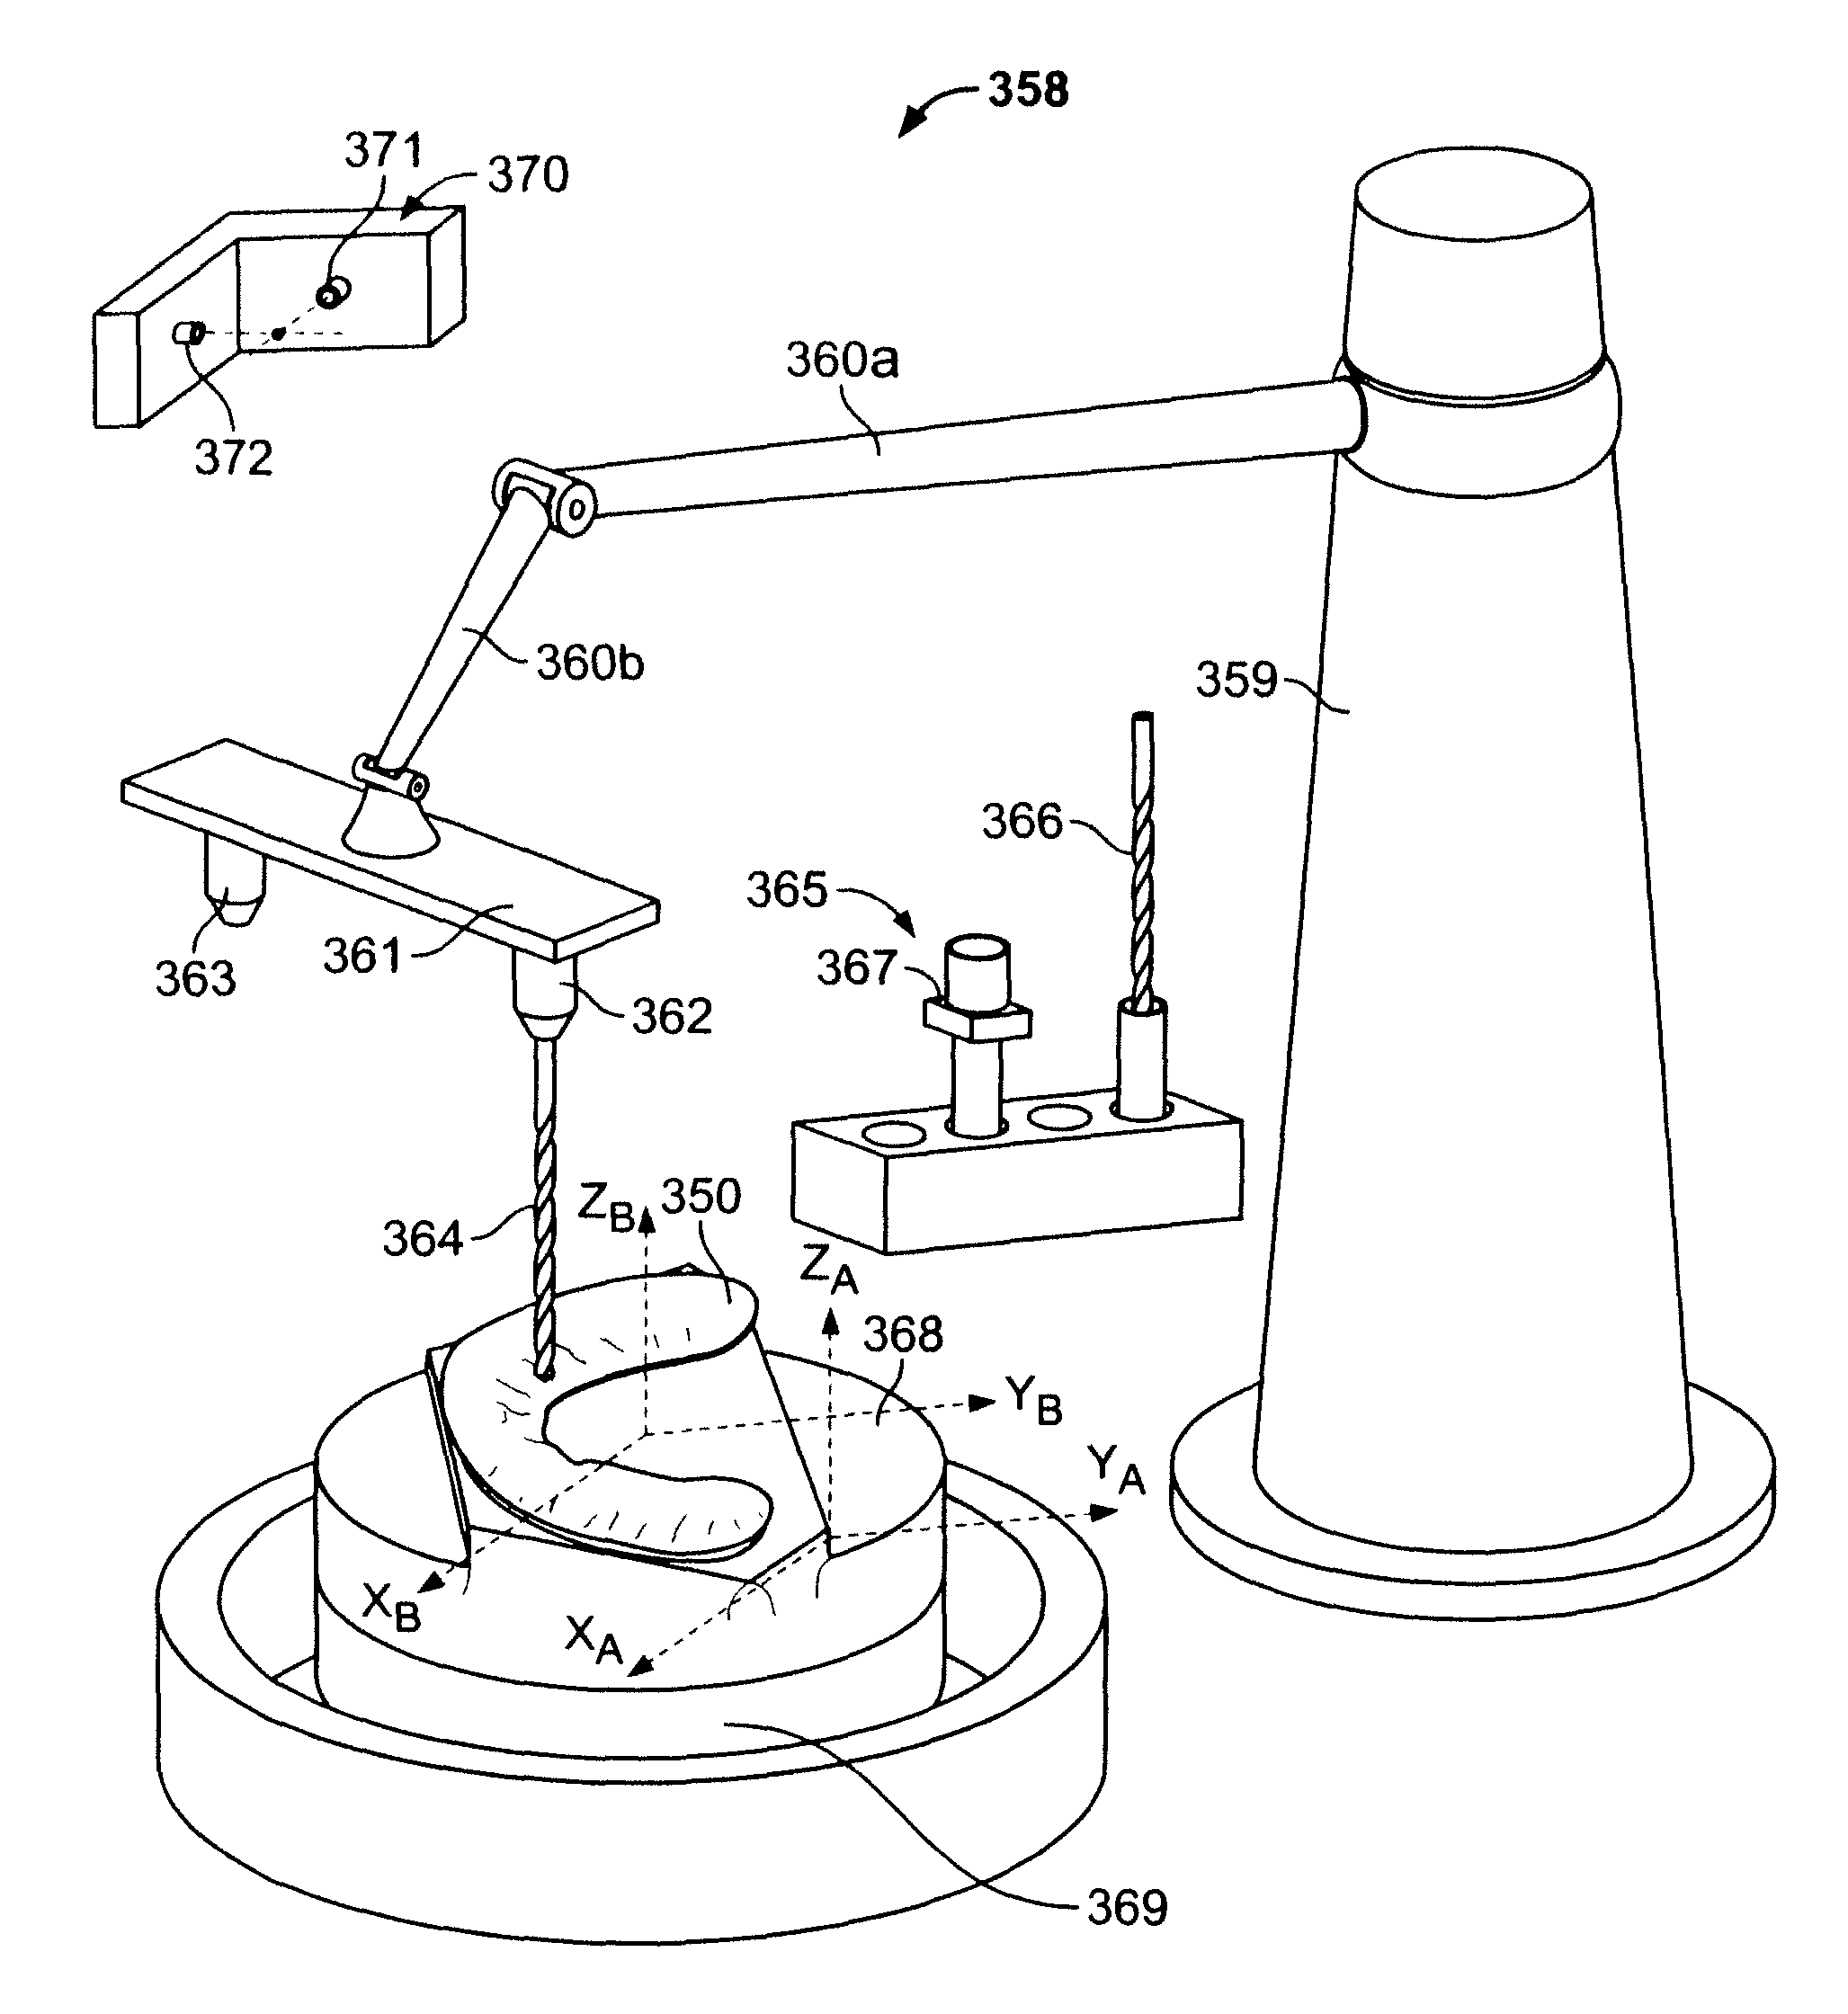 Method of creating an accurate bone and soft-tissue digital dental model